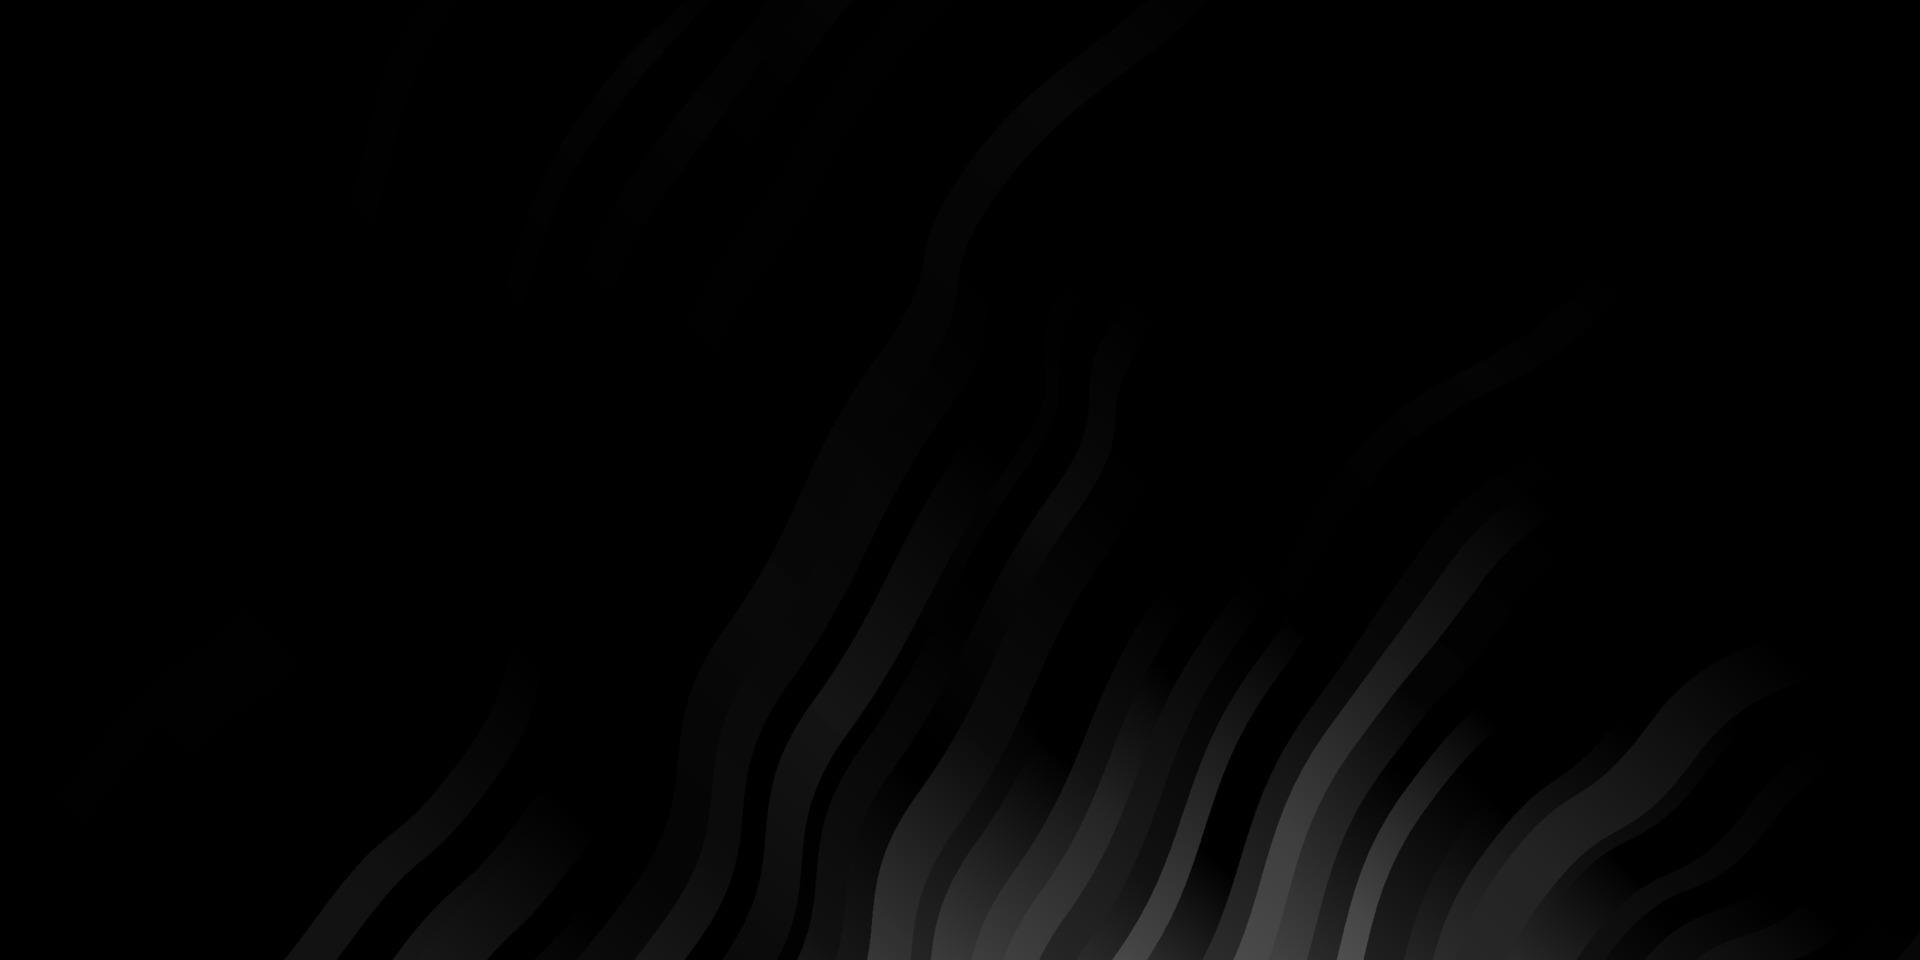 Dark Gray vector background with curved lines.